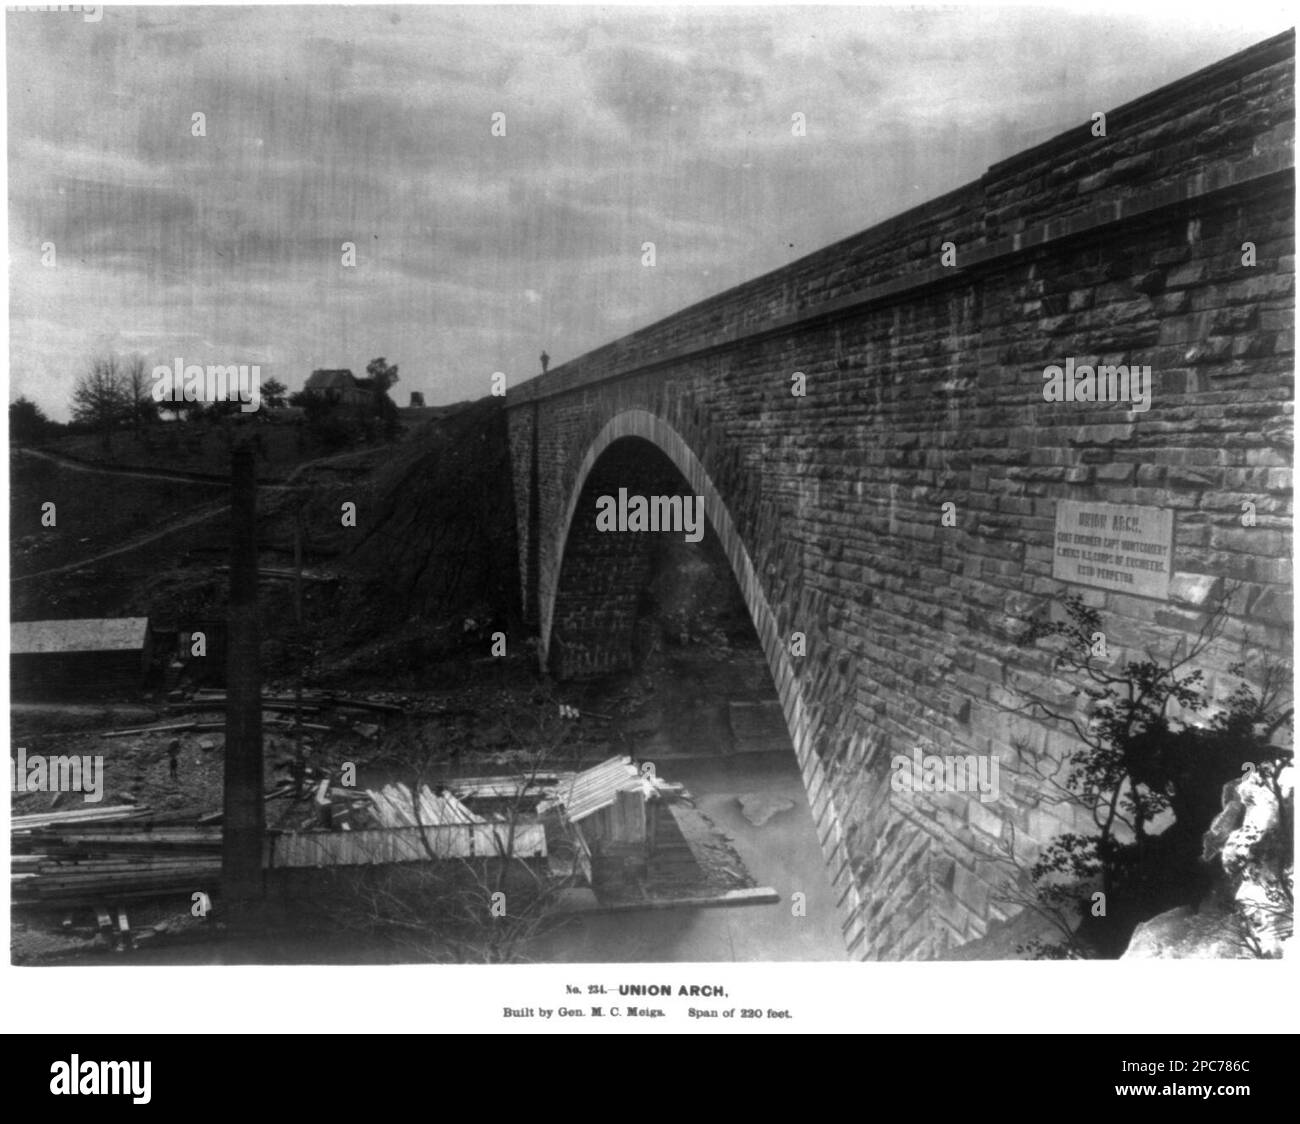 Union Arch, built by General M.C. Meigs, span of 220 feet. No. 234, Title from item. Bridges, Maryland, Cabin John, 1860-1870, Aqueducts, Washington (D.C.), 1860-1870, United States, History, Civil War, 1861-1865, Engineering & construction. Stock Photo